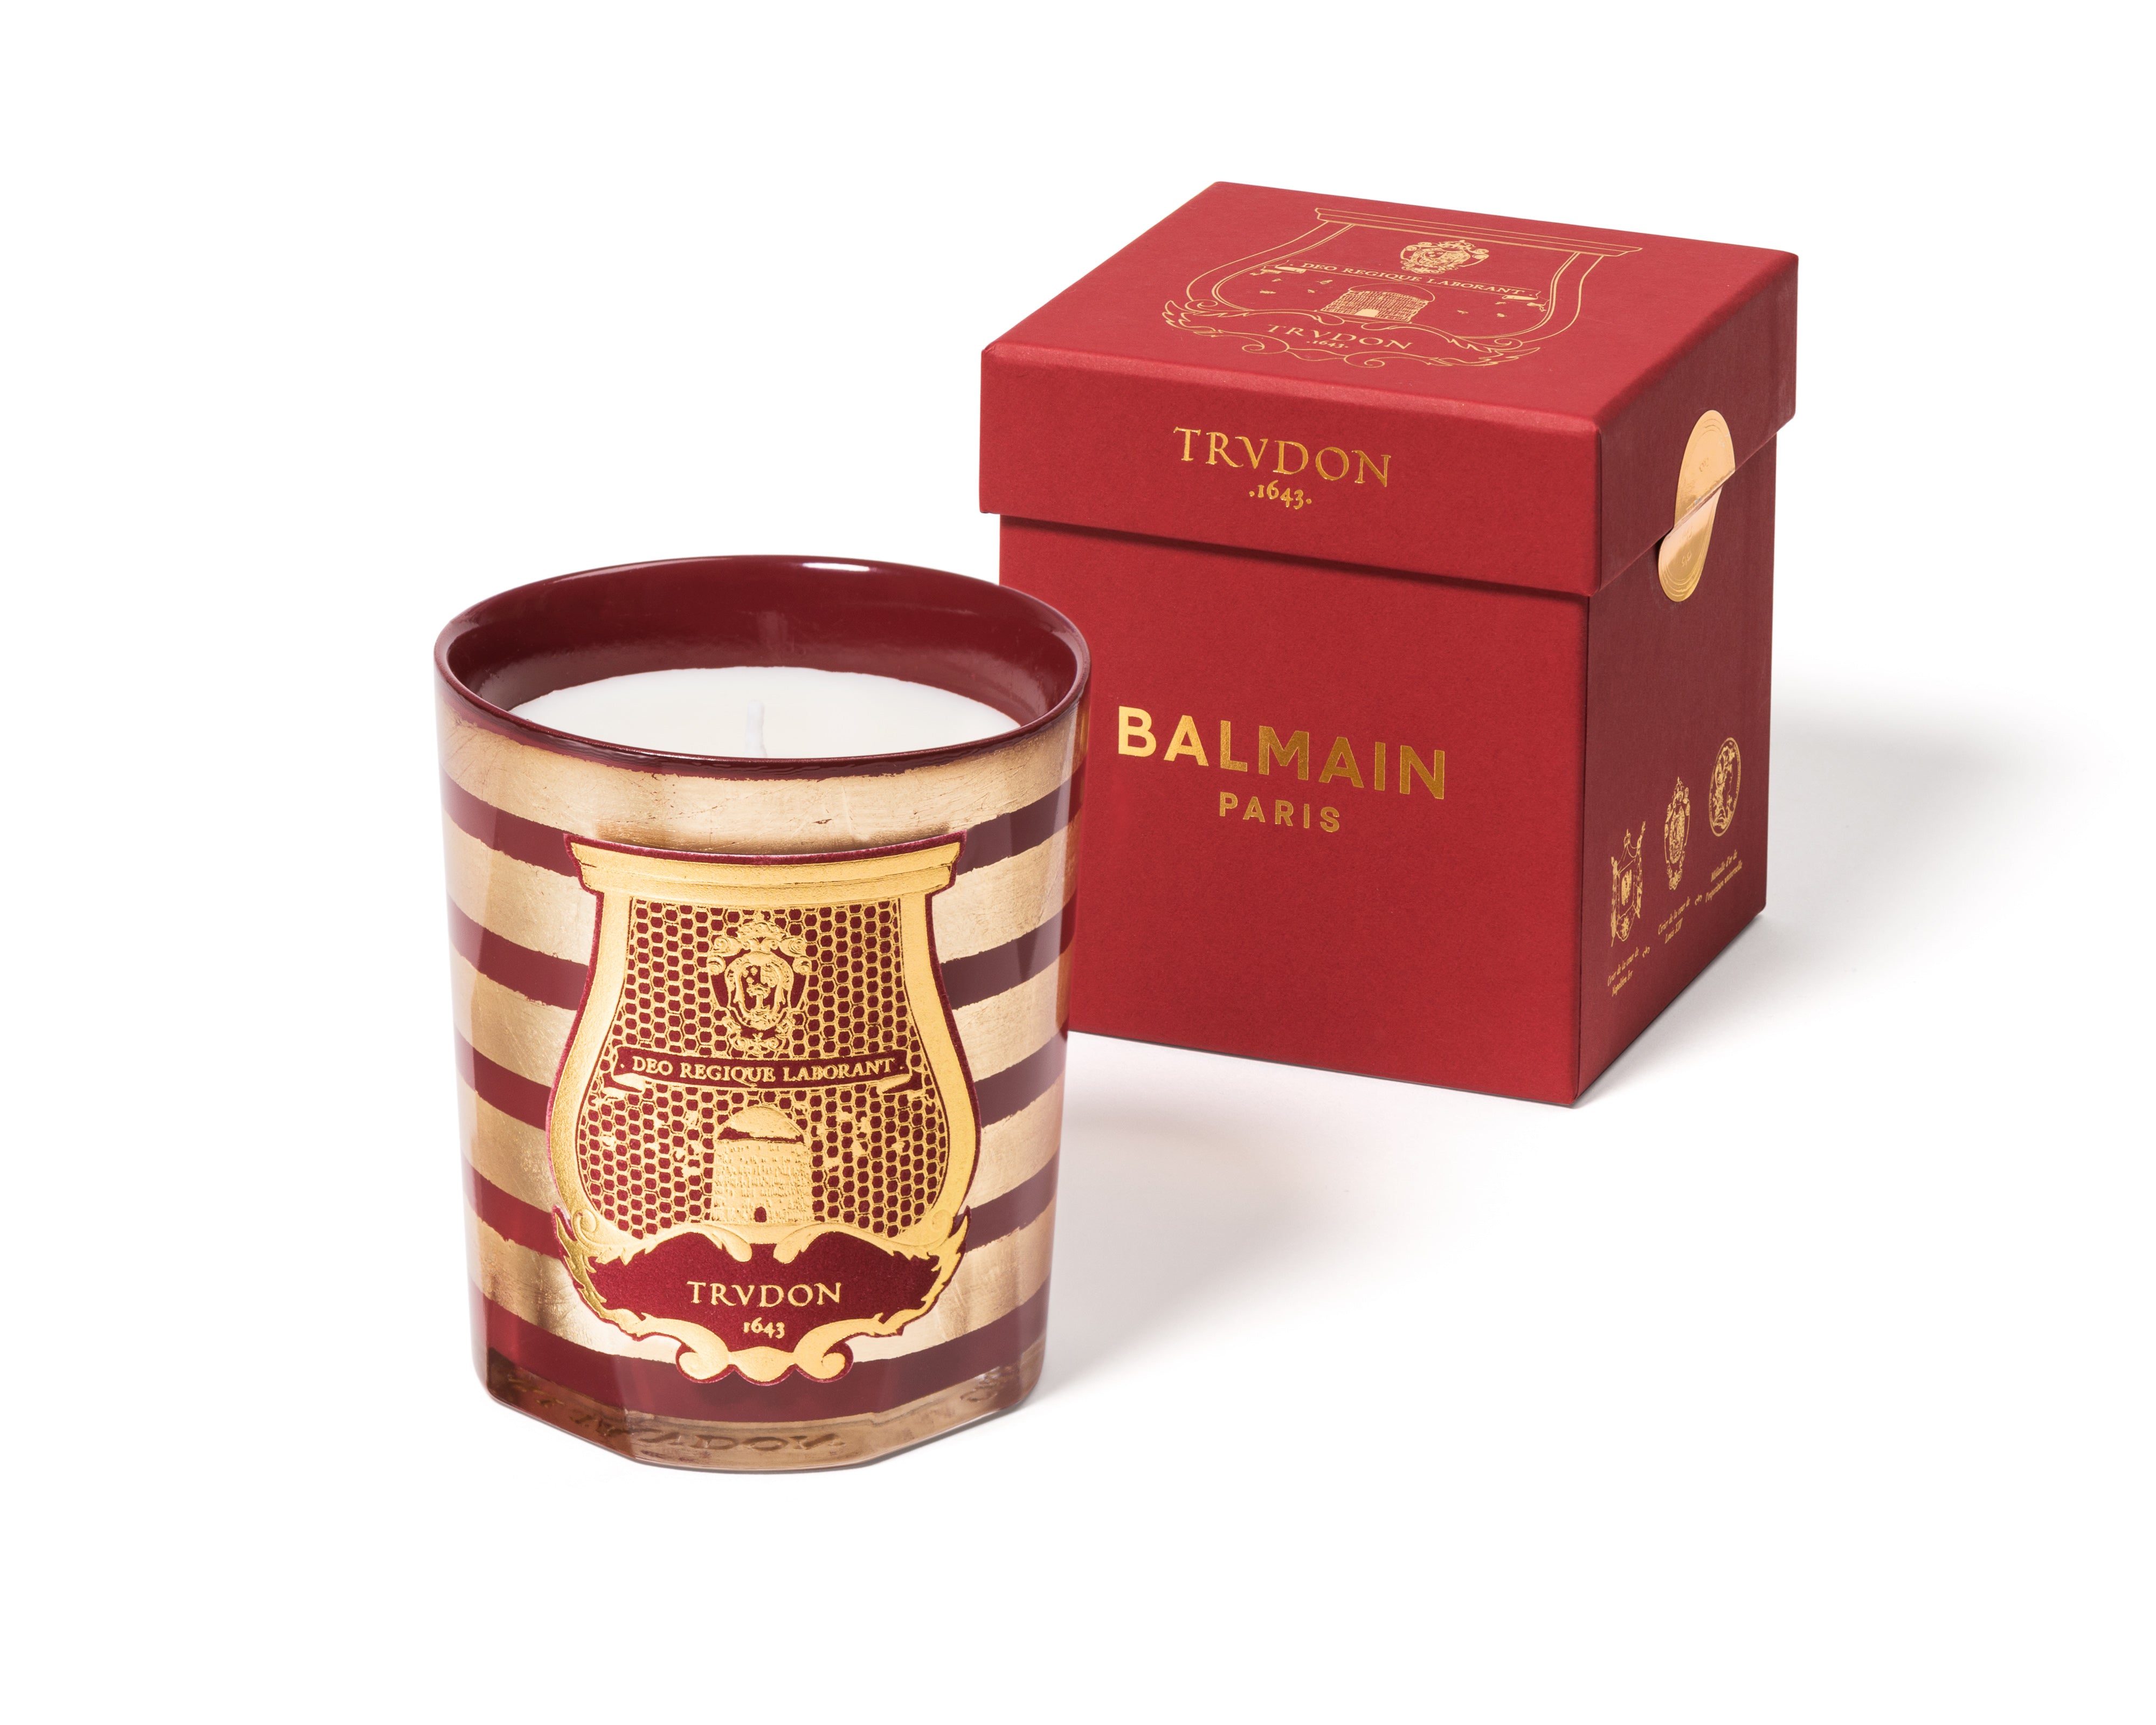 Cire Trudon x Balmain Limited Edition Candle, 270g, with stunning red gift box.